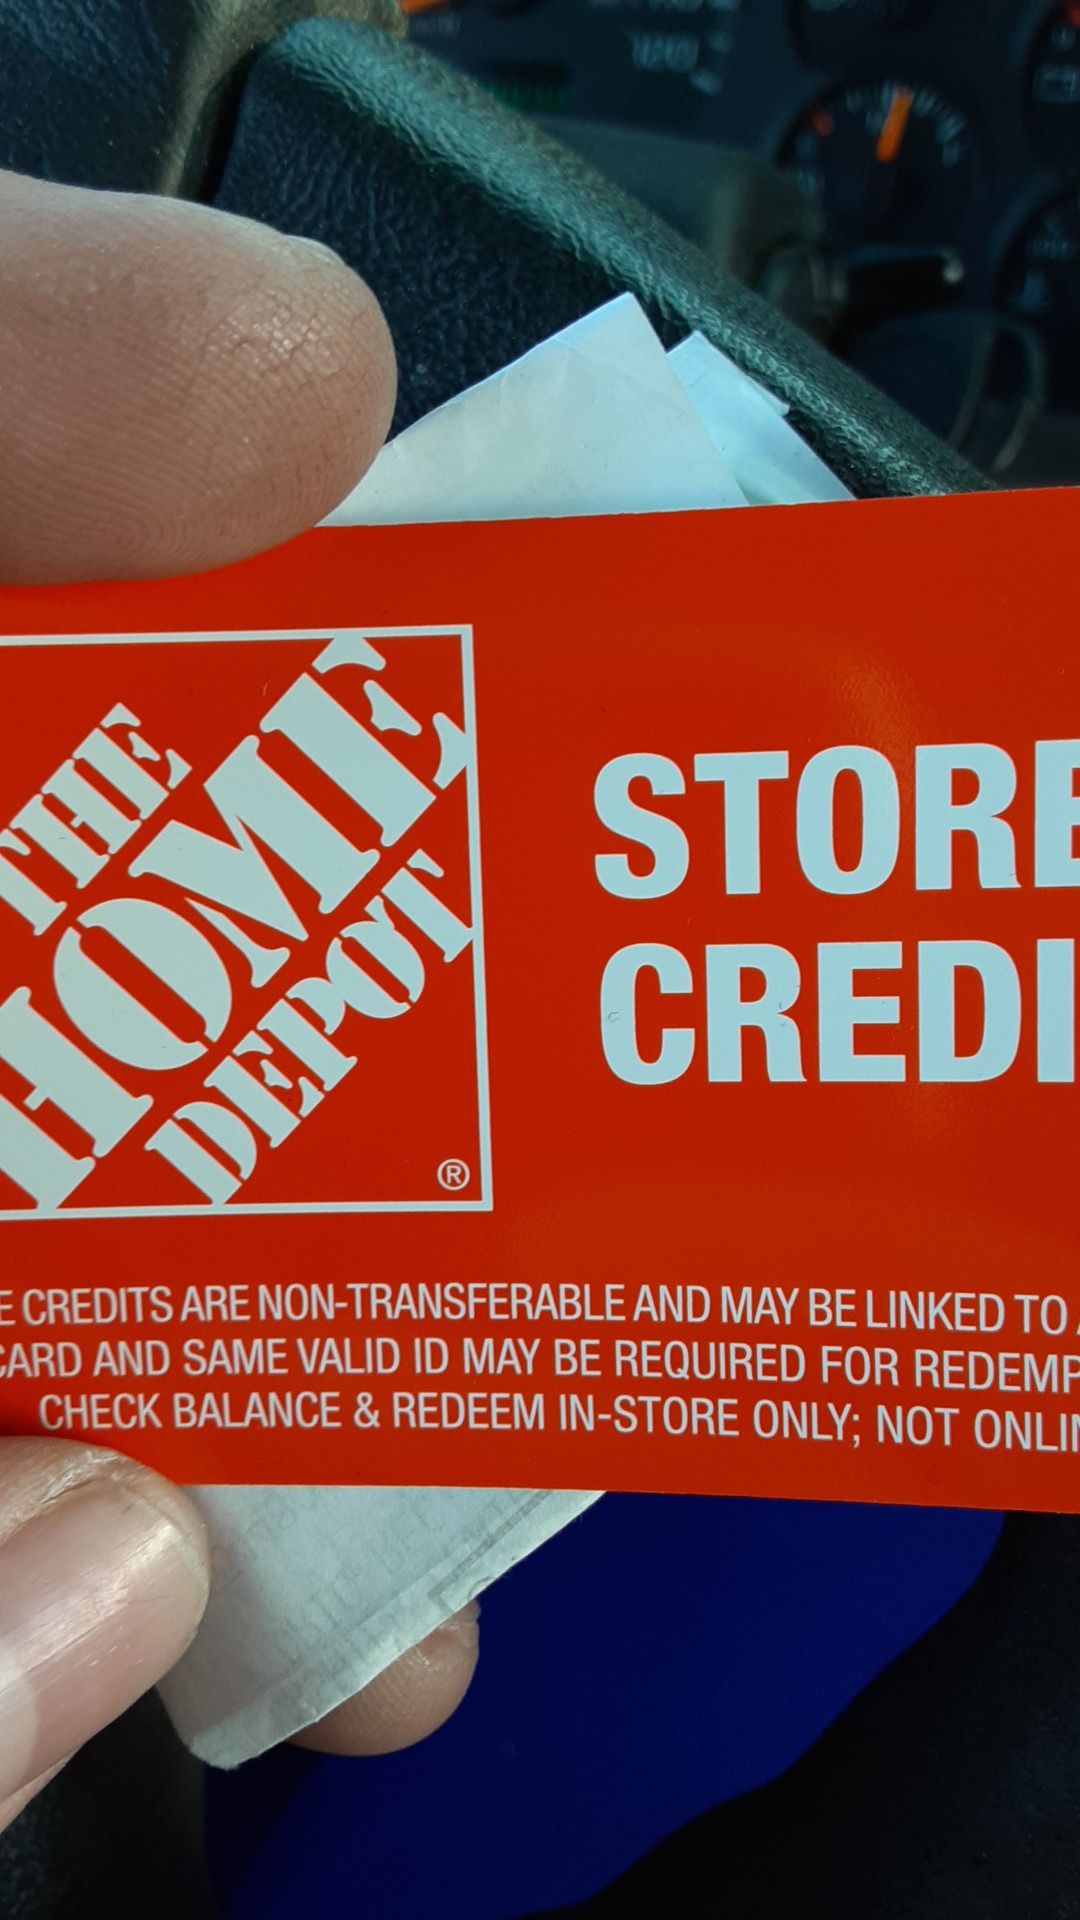 Home depot store credit